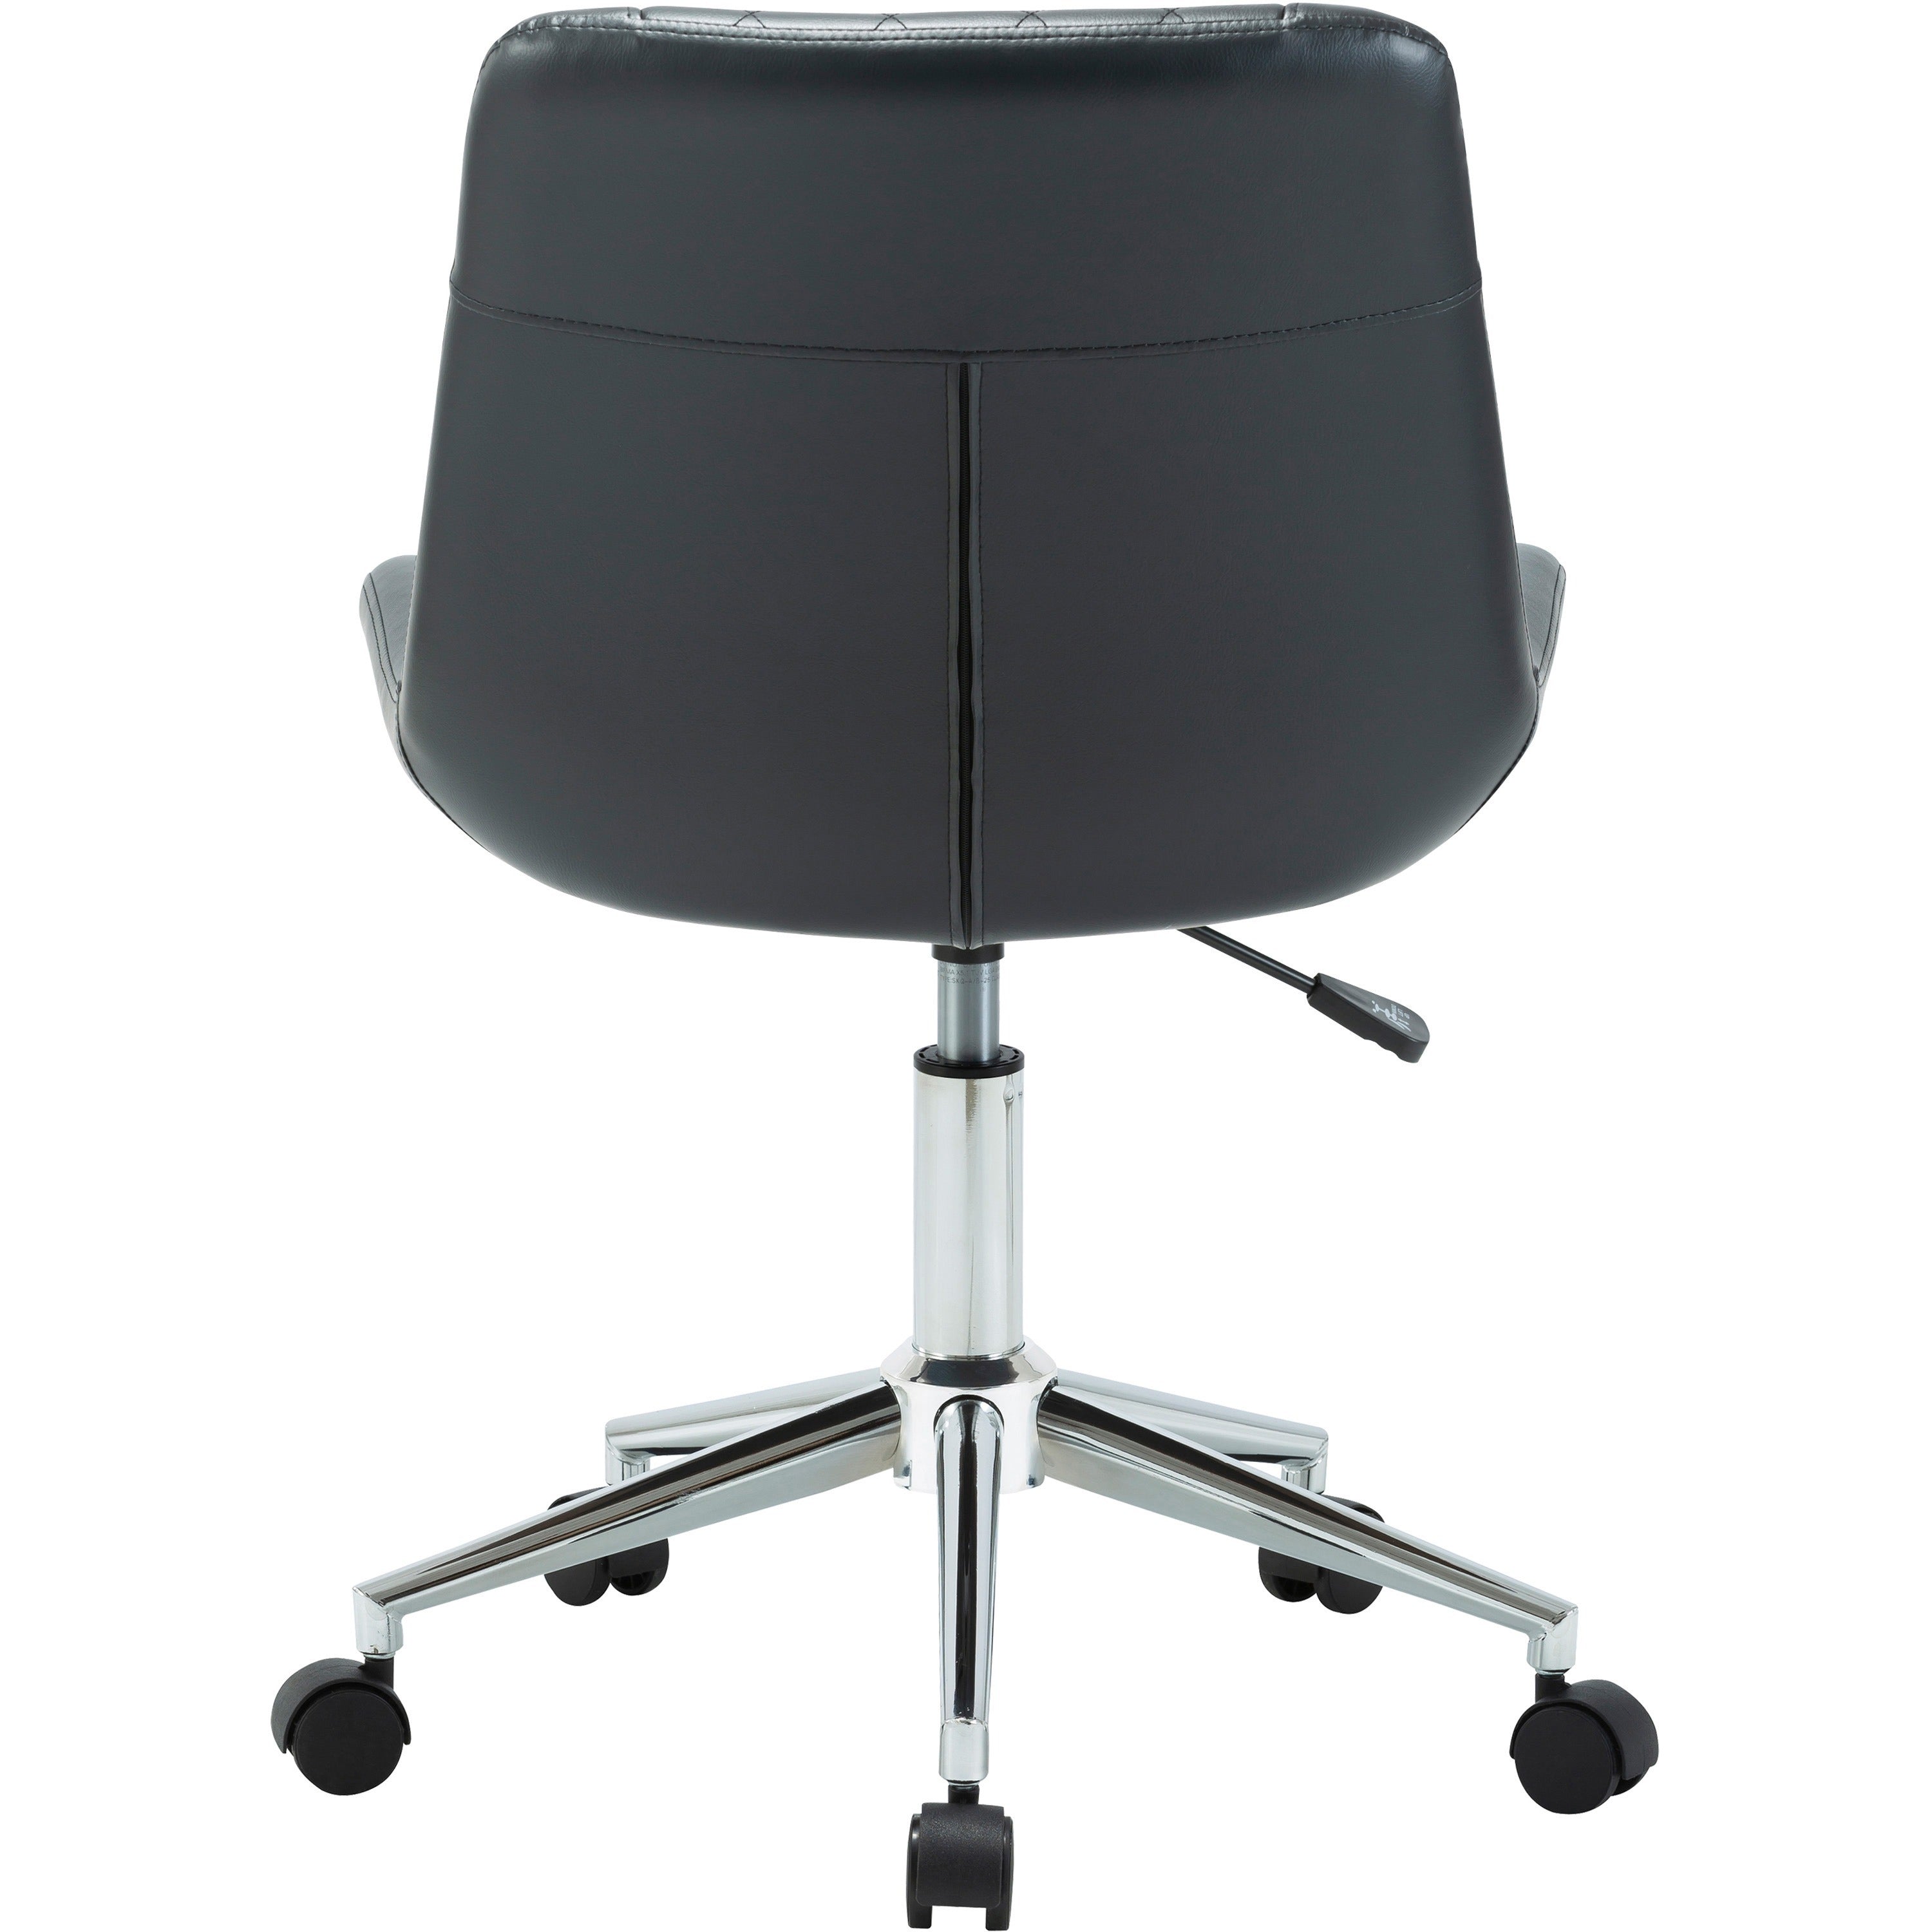 lys-low-back-office-chair-black-plywood-bonded-leather-seat-black-plywood-vinyl-back-low-back-1-each_lysch304bnbk - 5